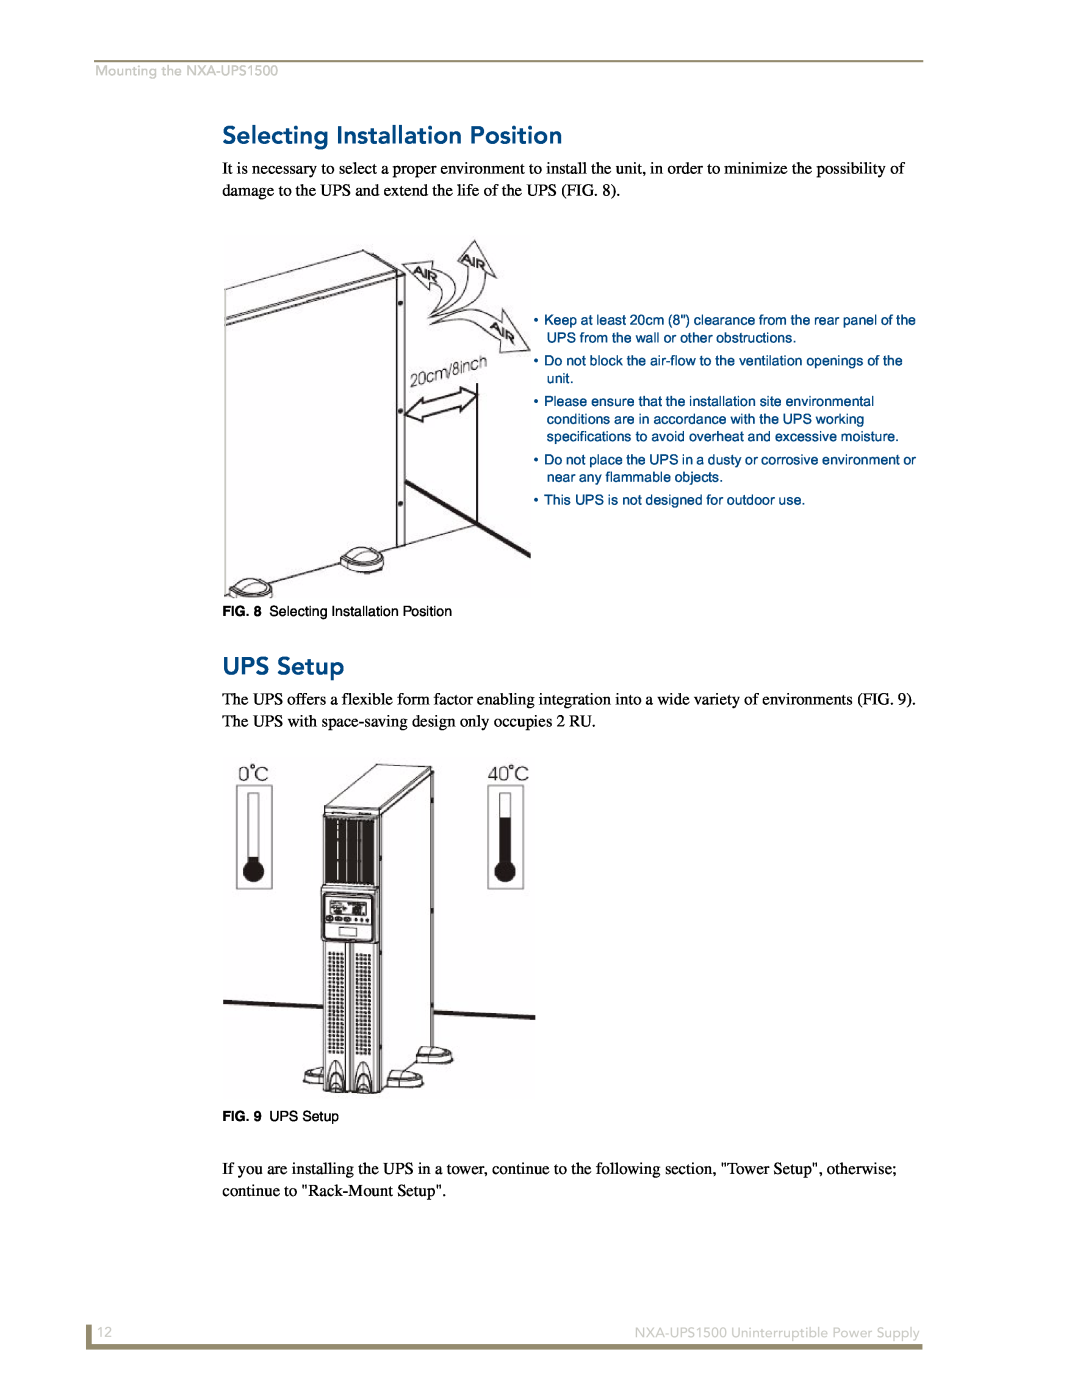 AMX NXA-UPS1500 manual Selecting Installation Position, UPS Setup, This UPS is not designed for outdoor use 